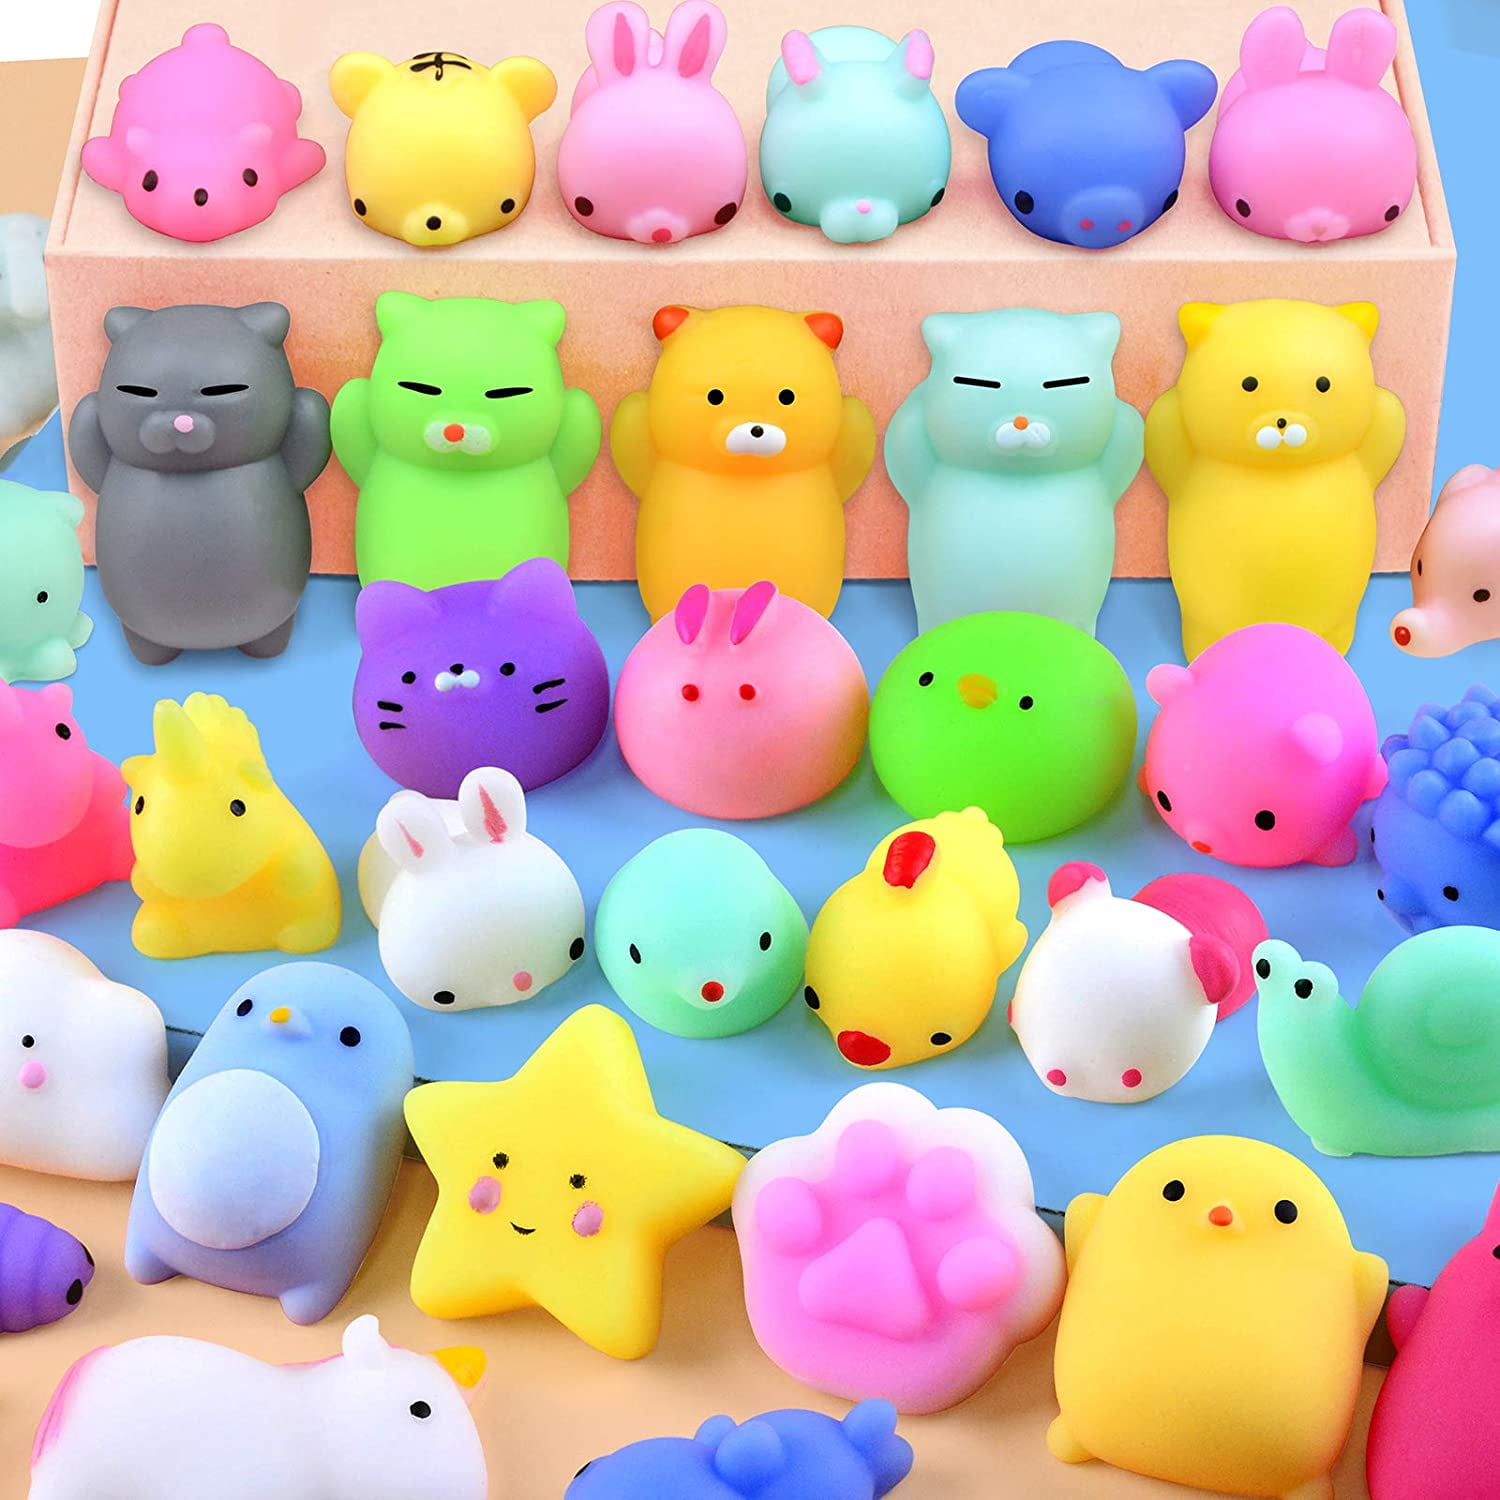 Random 85Pcs Mochi Squishy Toys Party Favors for Kids Kawaii Animal Mini Squishies Stress Relief Toys Birthday Xmas Easter Gifts for Girl Boy Classroom Prizes Goodie Bag Fillers Easter Egg Fillers 